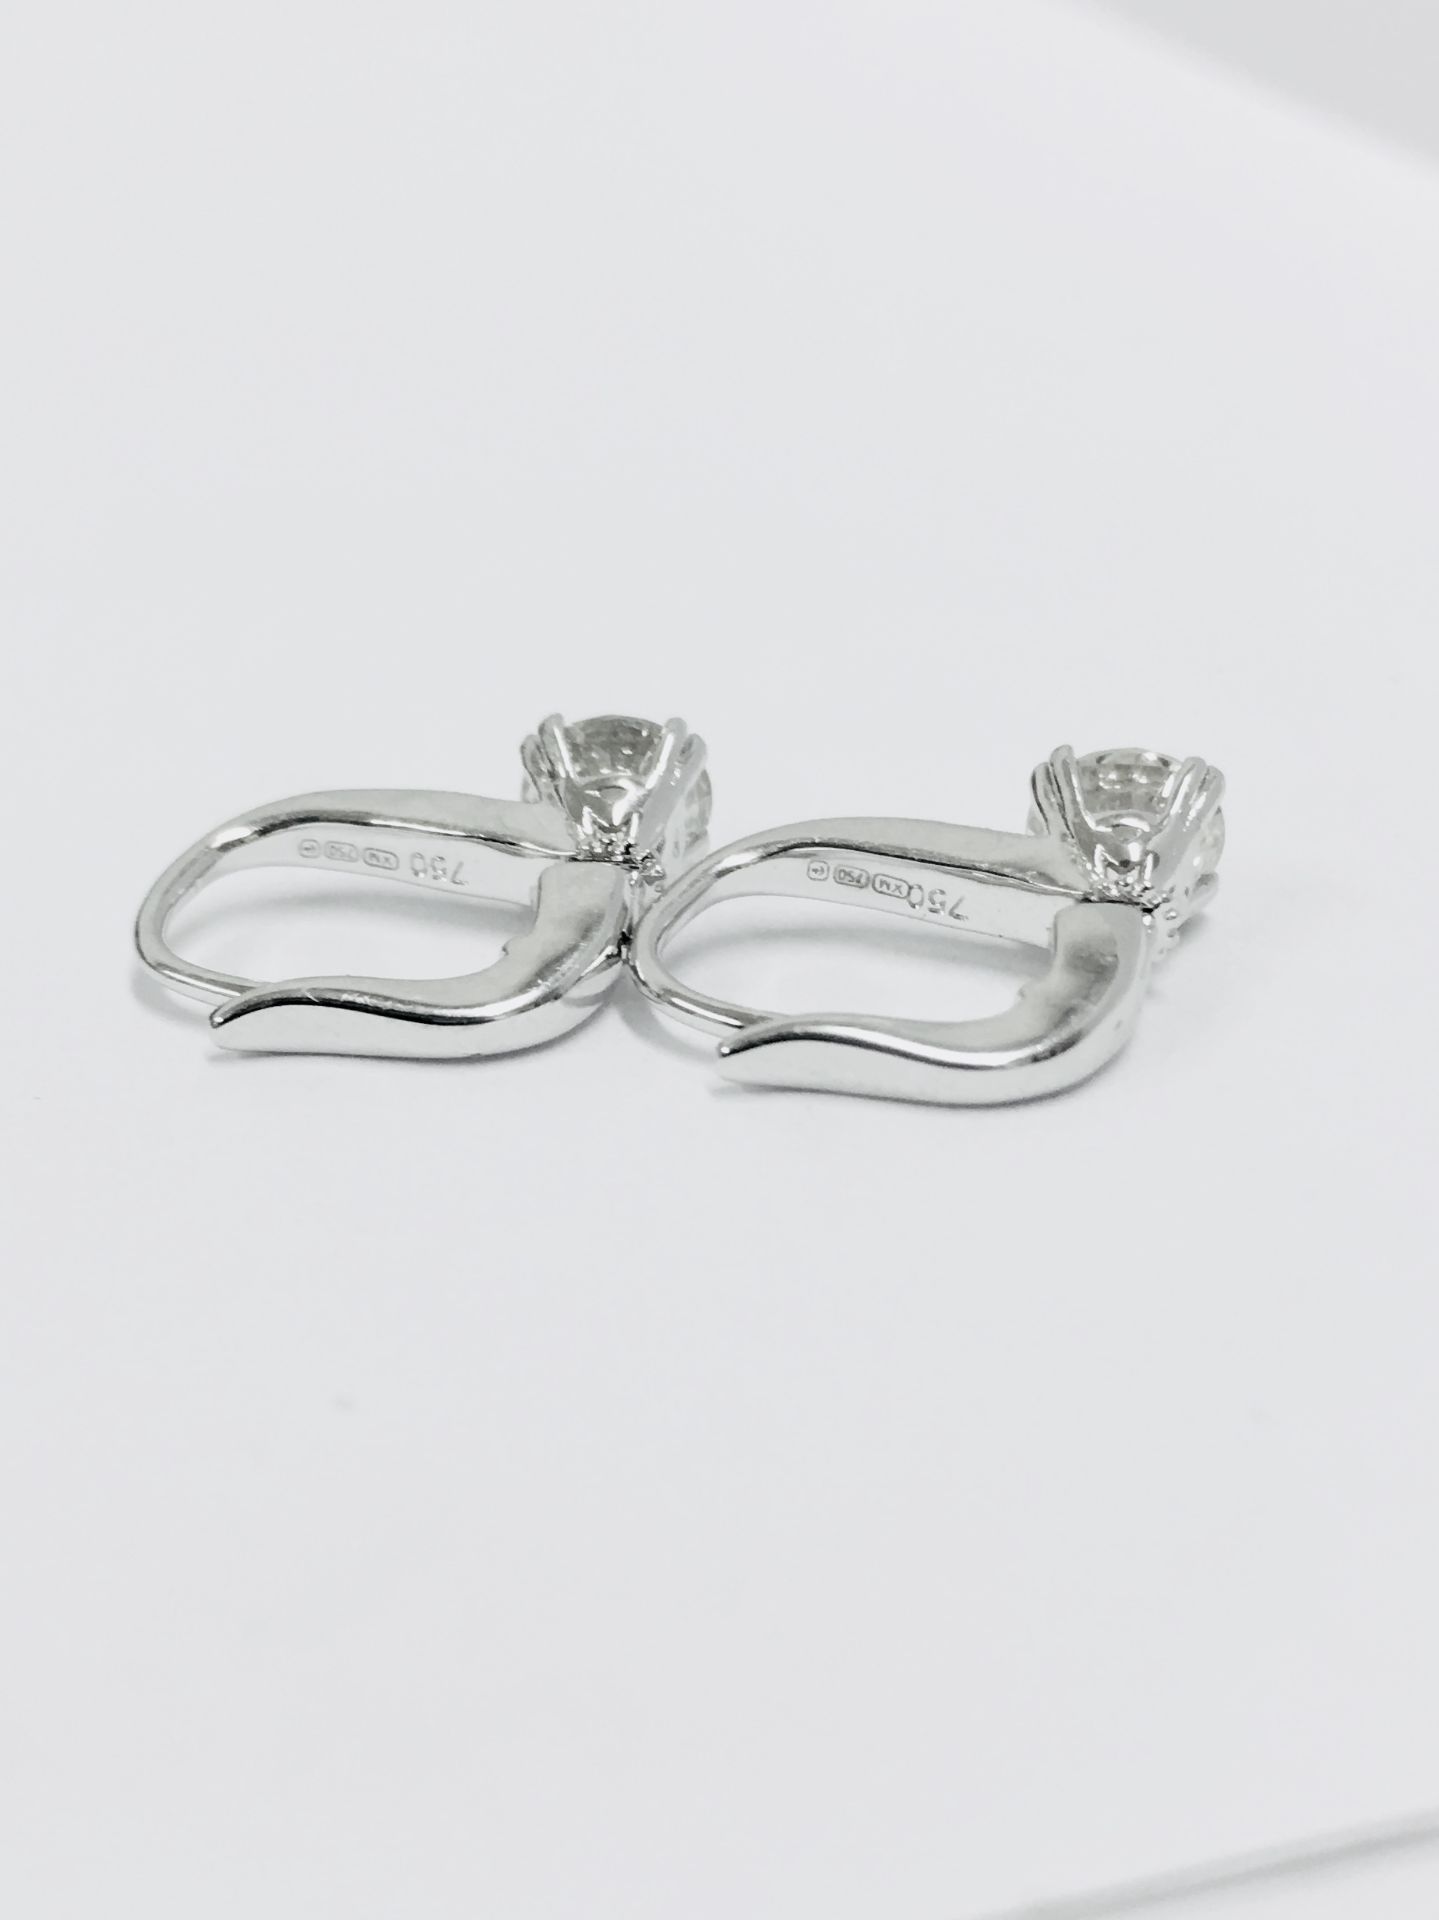 18Ct White Gold Hoop Style Earrings With Hinge Fastners. - Image 14 of 22